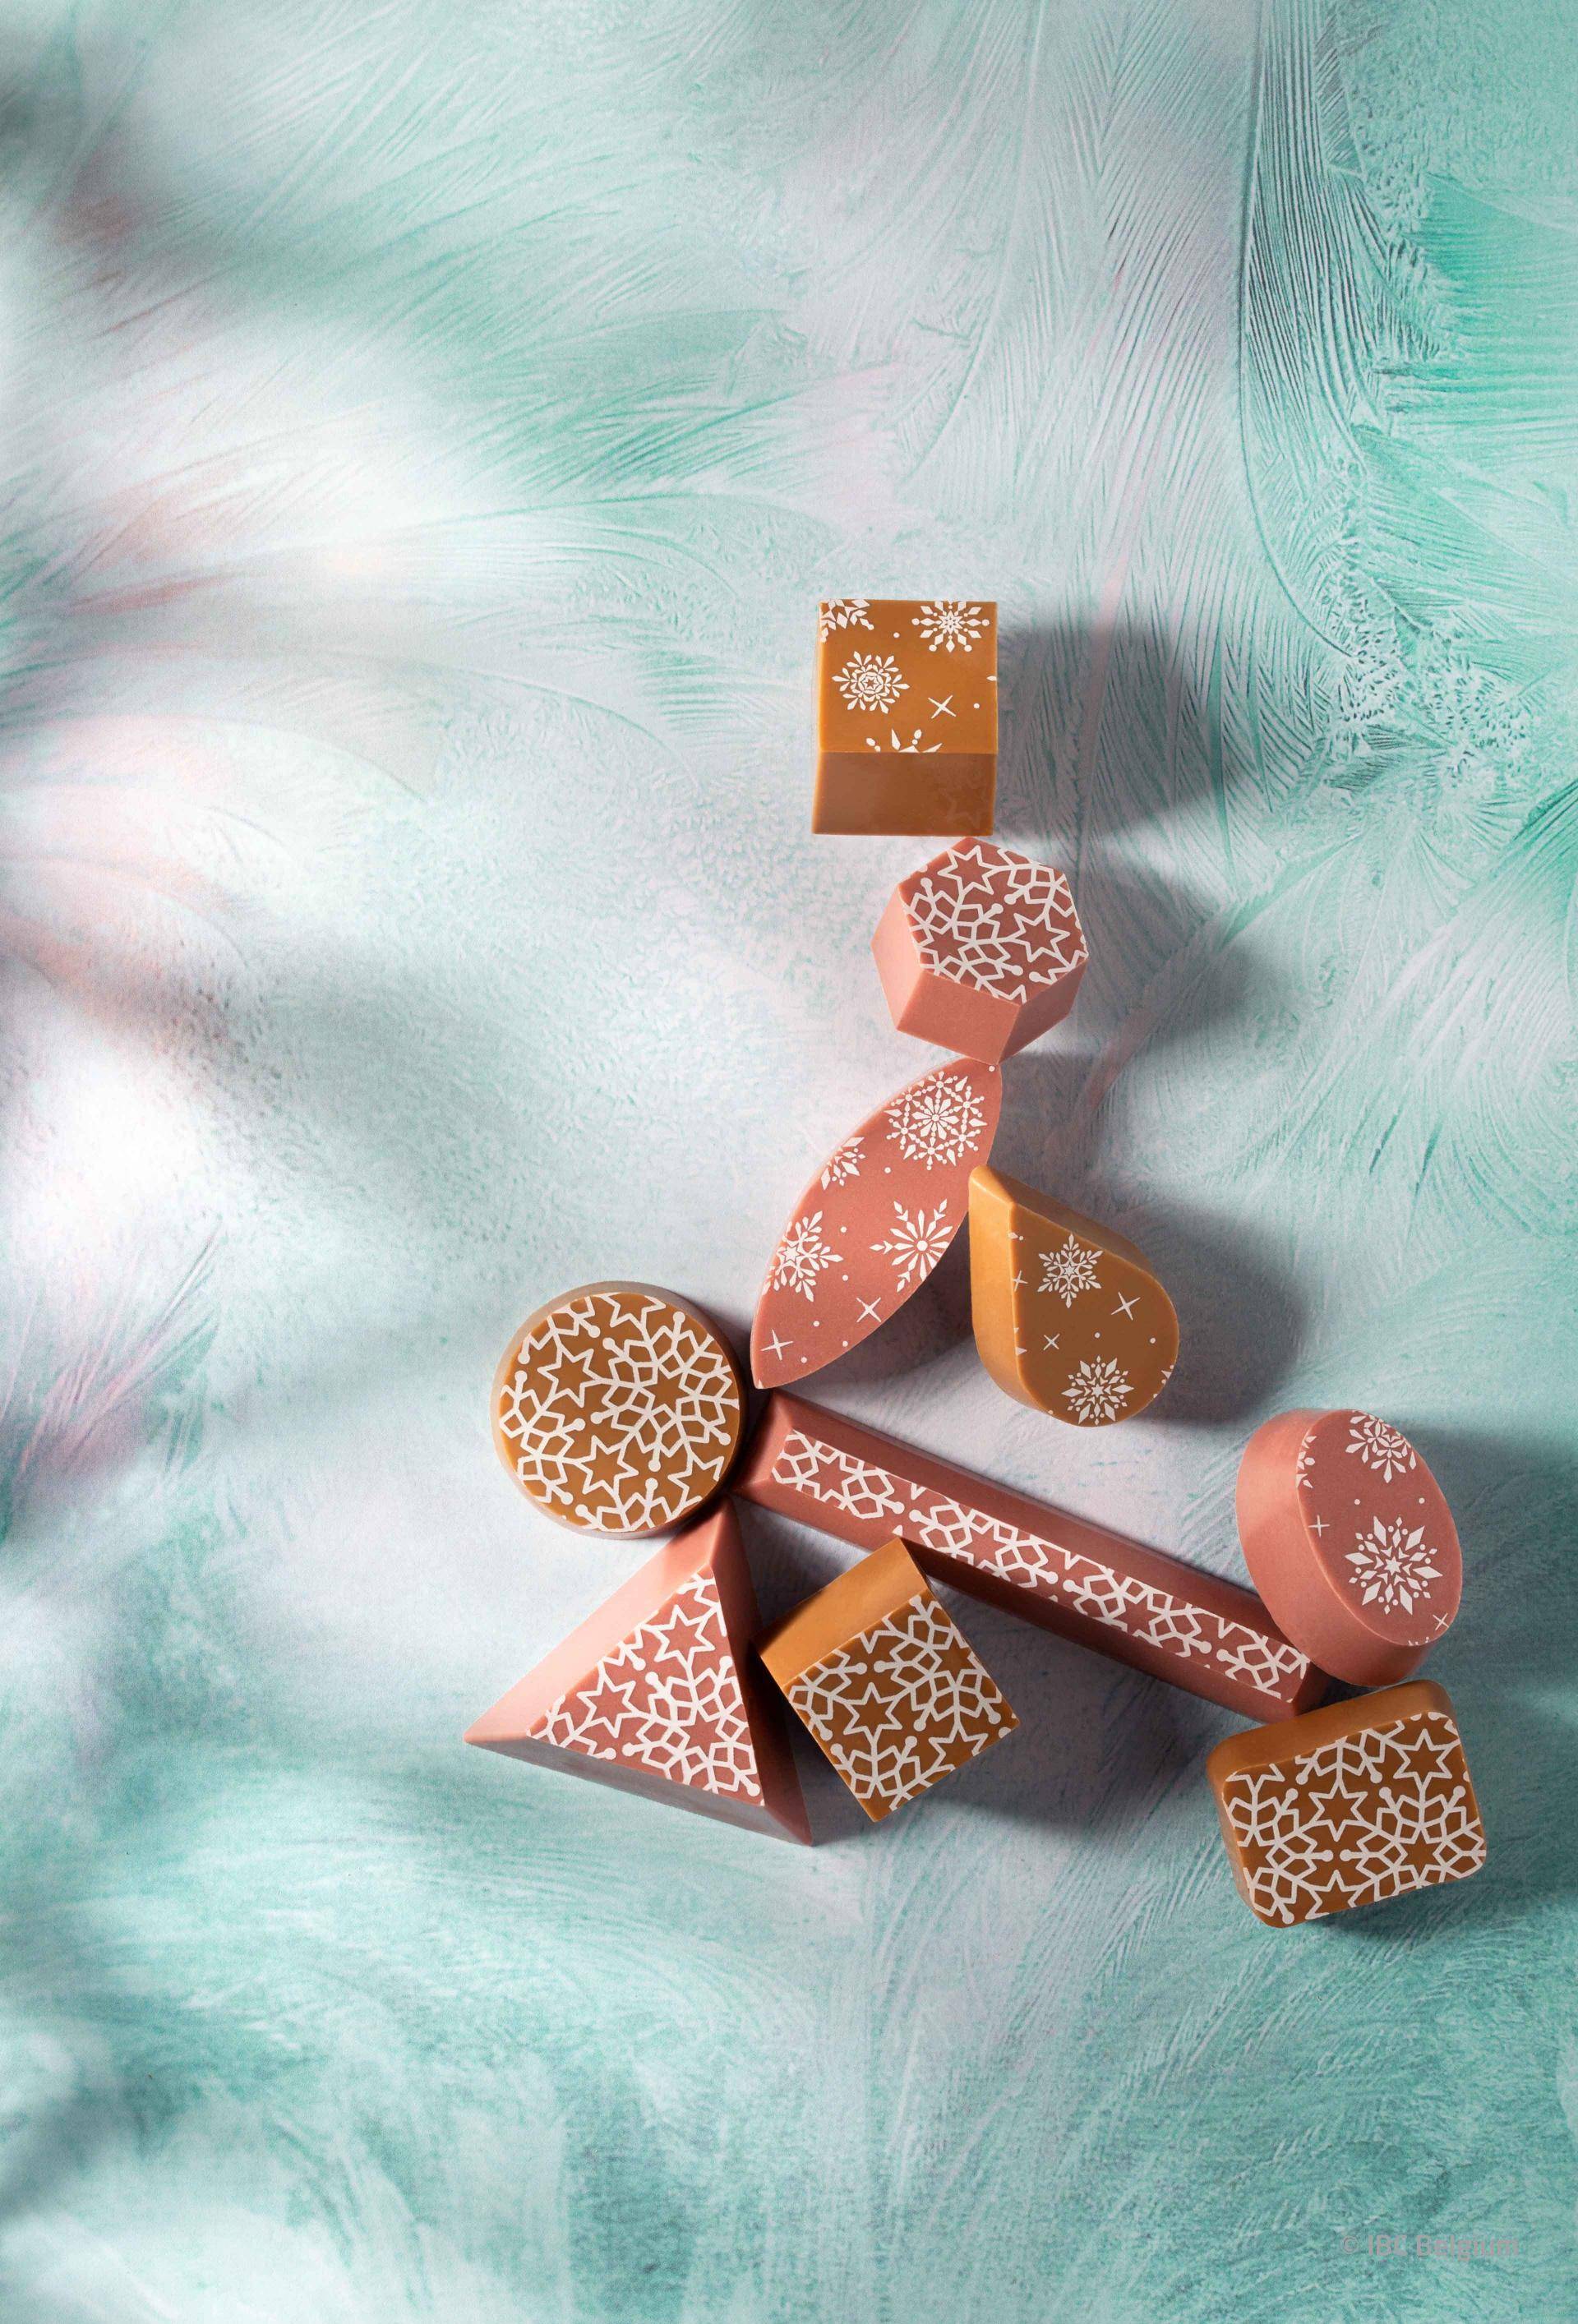 Ruby chocolate and Caramel pralines, snowflake inspired transfer